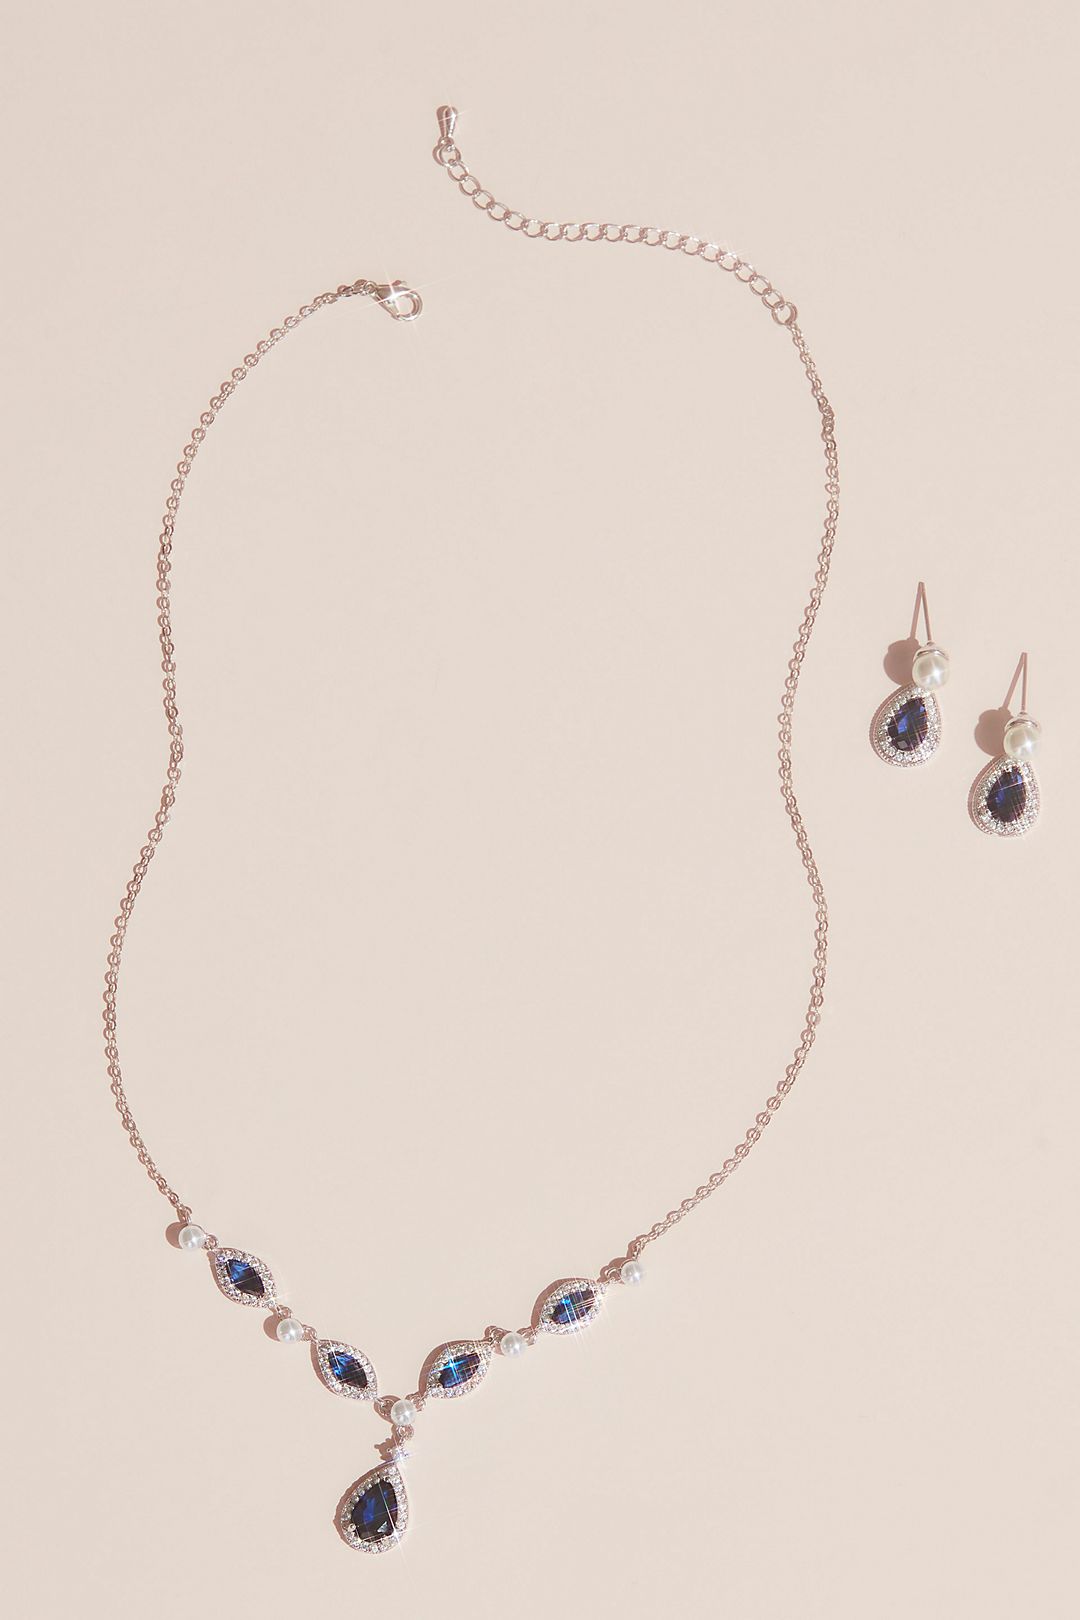 Cubic Zirconia and Pearl Necklace and Earring Set Image 3